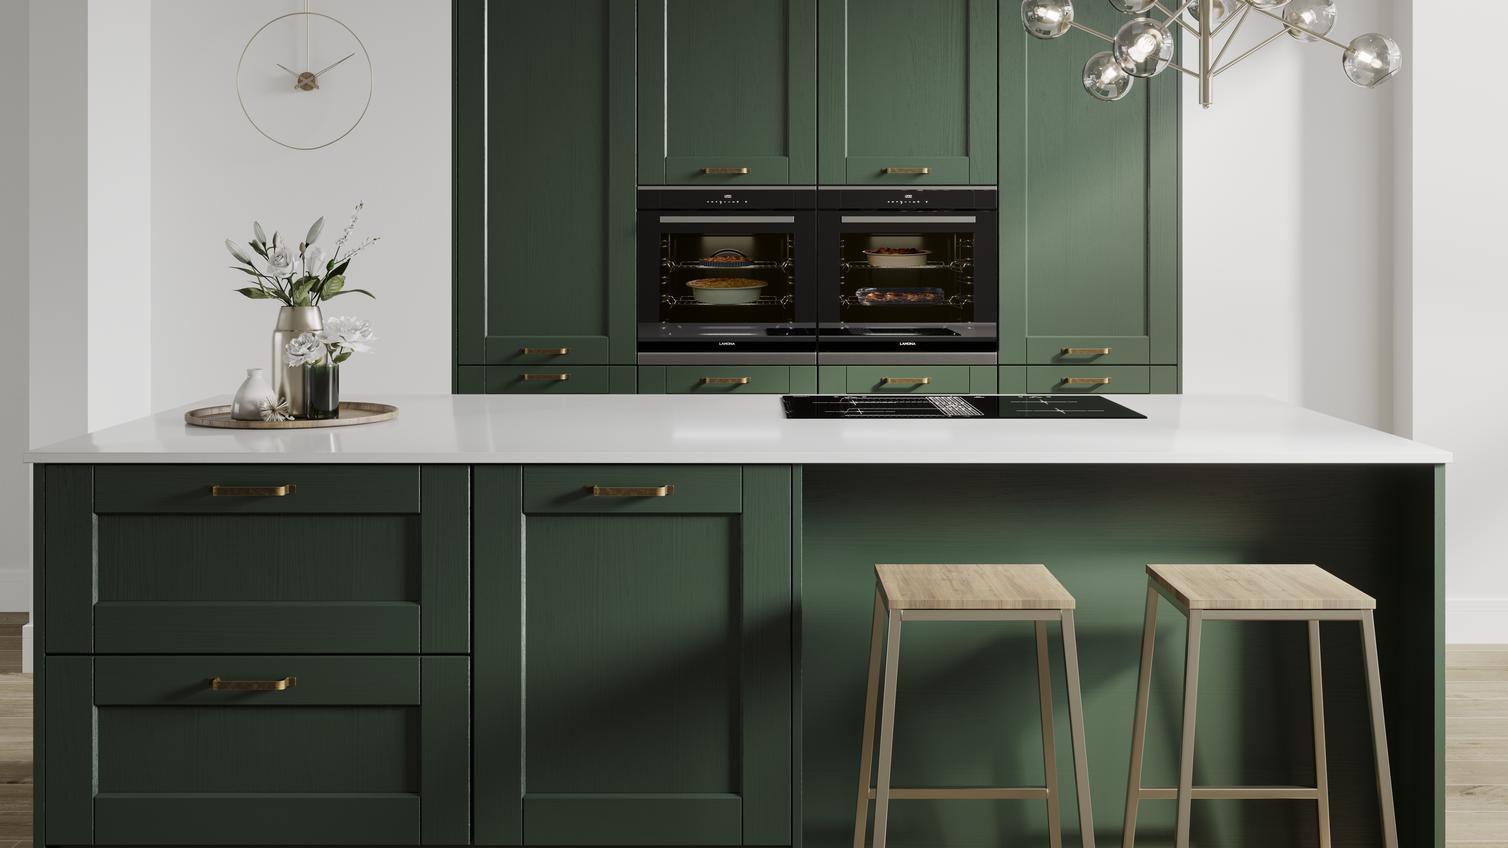 Designer green shaker kitchen with wood grain effect finish an island layout. Double larder units and two built in ovens.